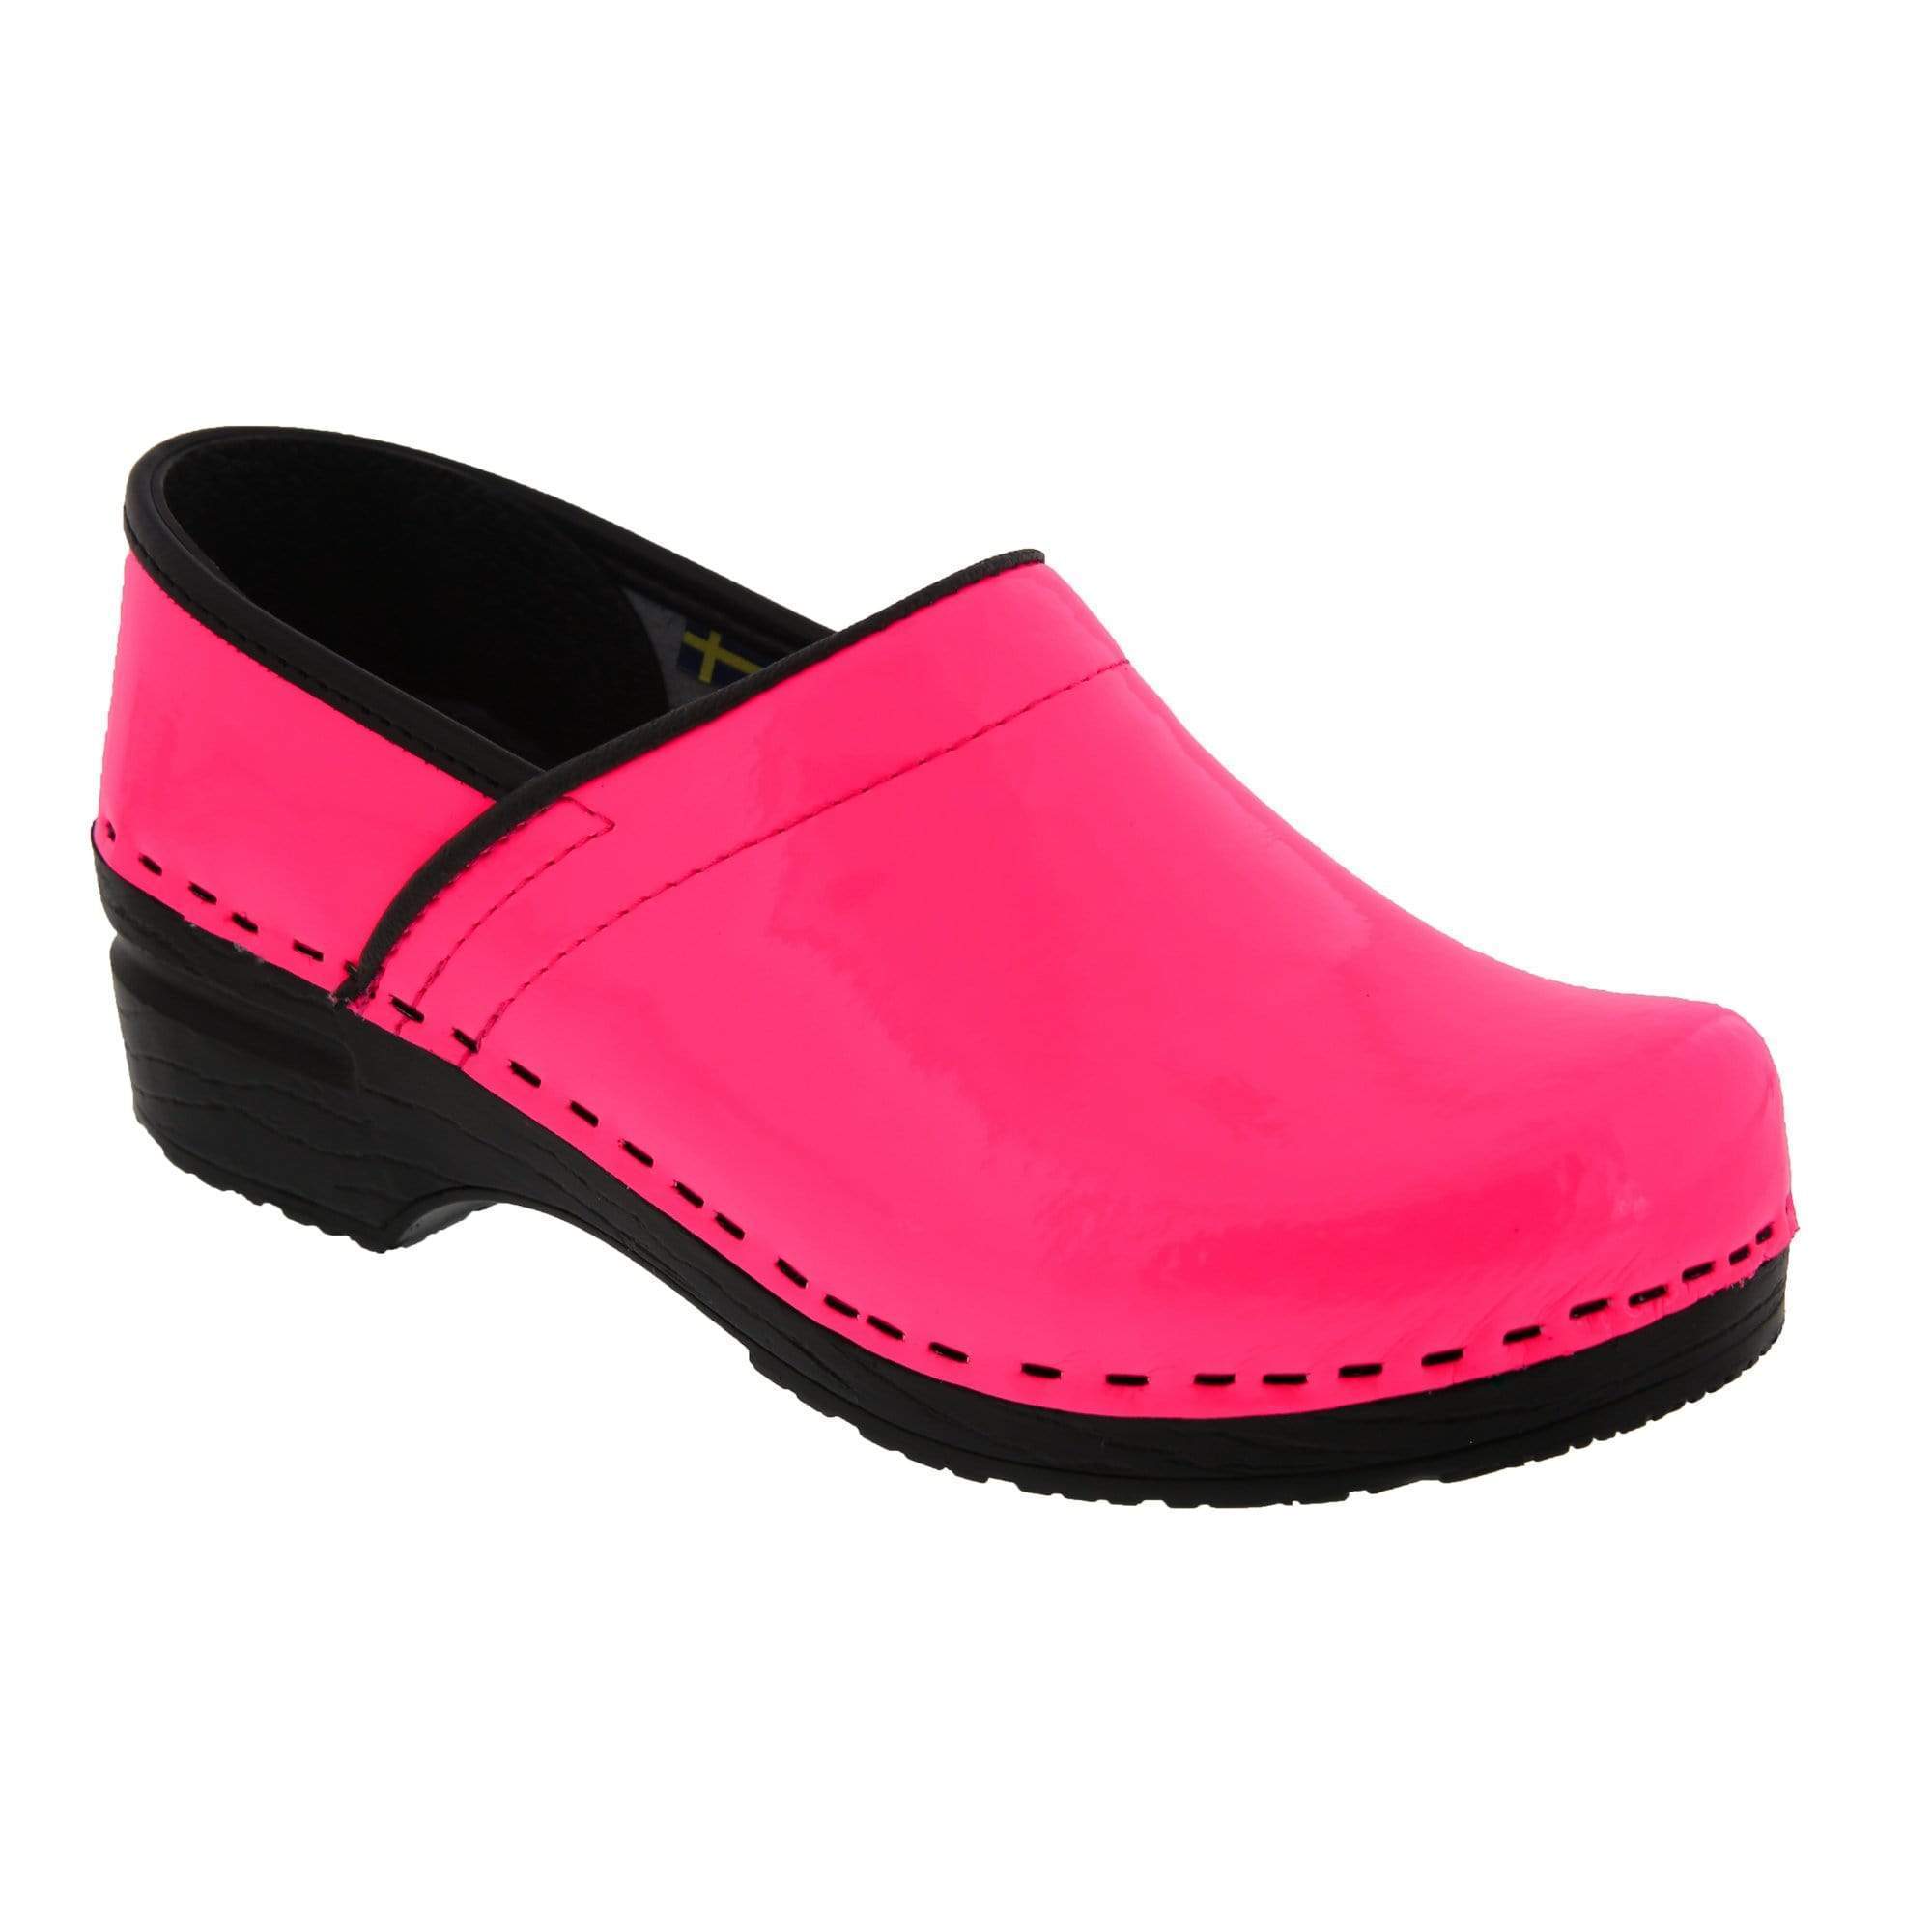 pink patent leather clogs